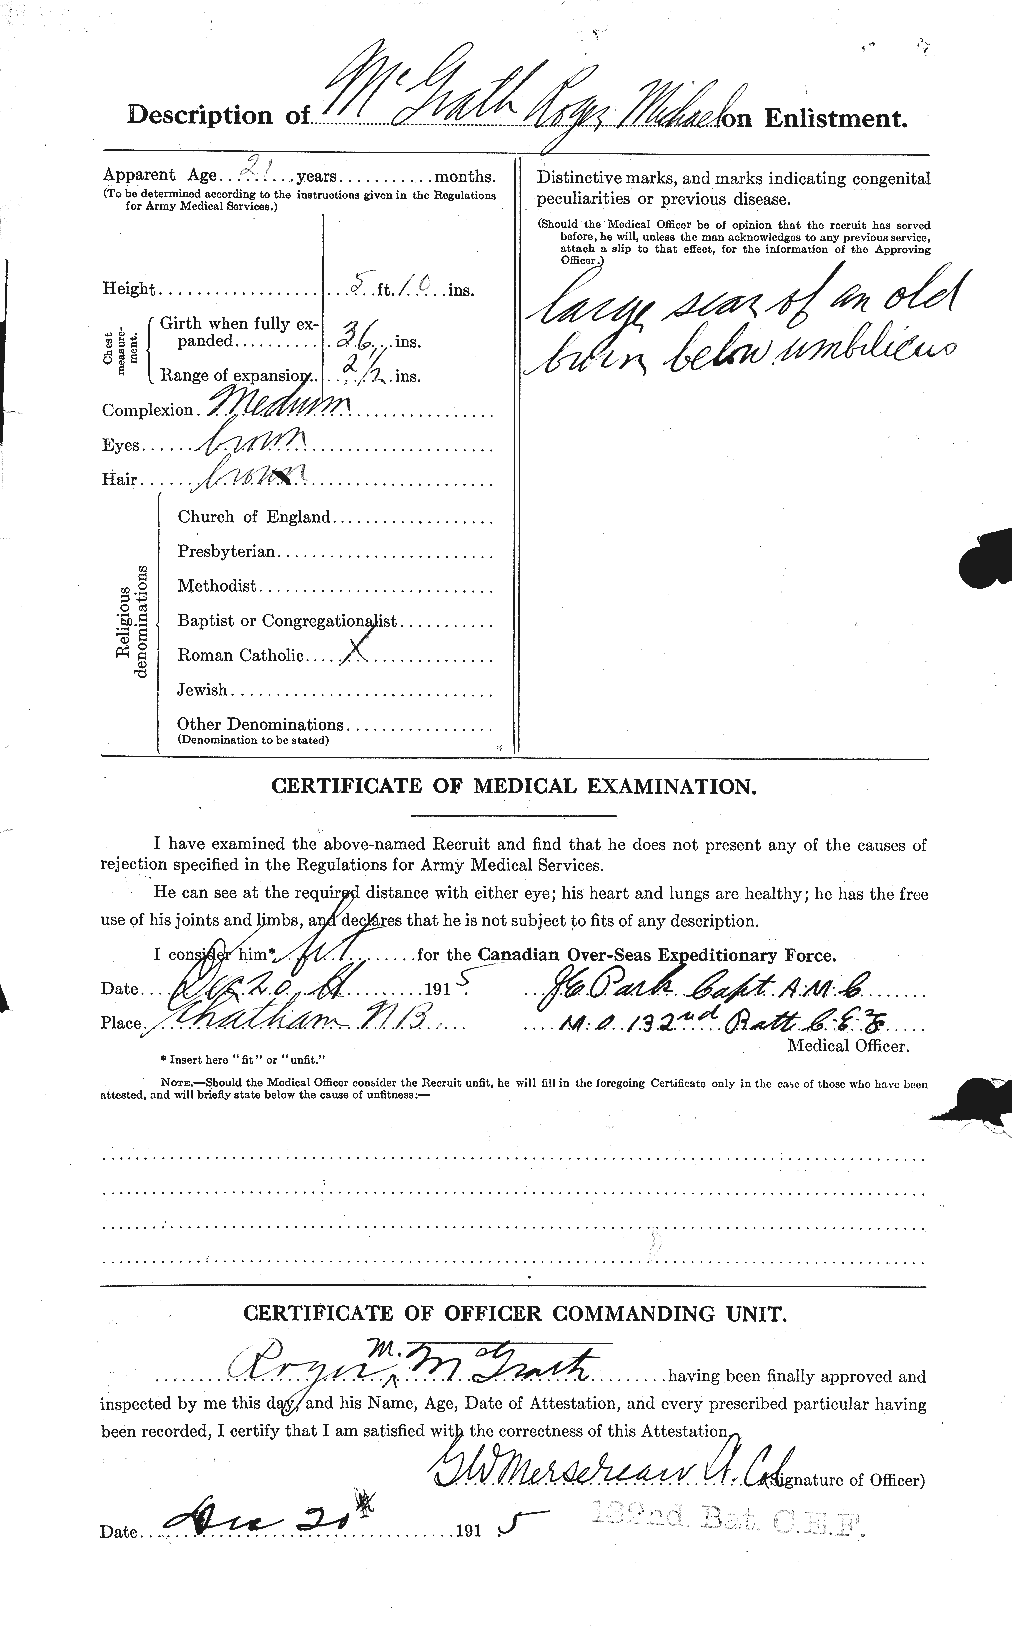 Personnel Records of the First World War - CEF 523673b